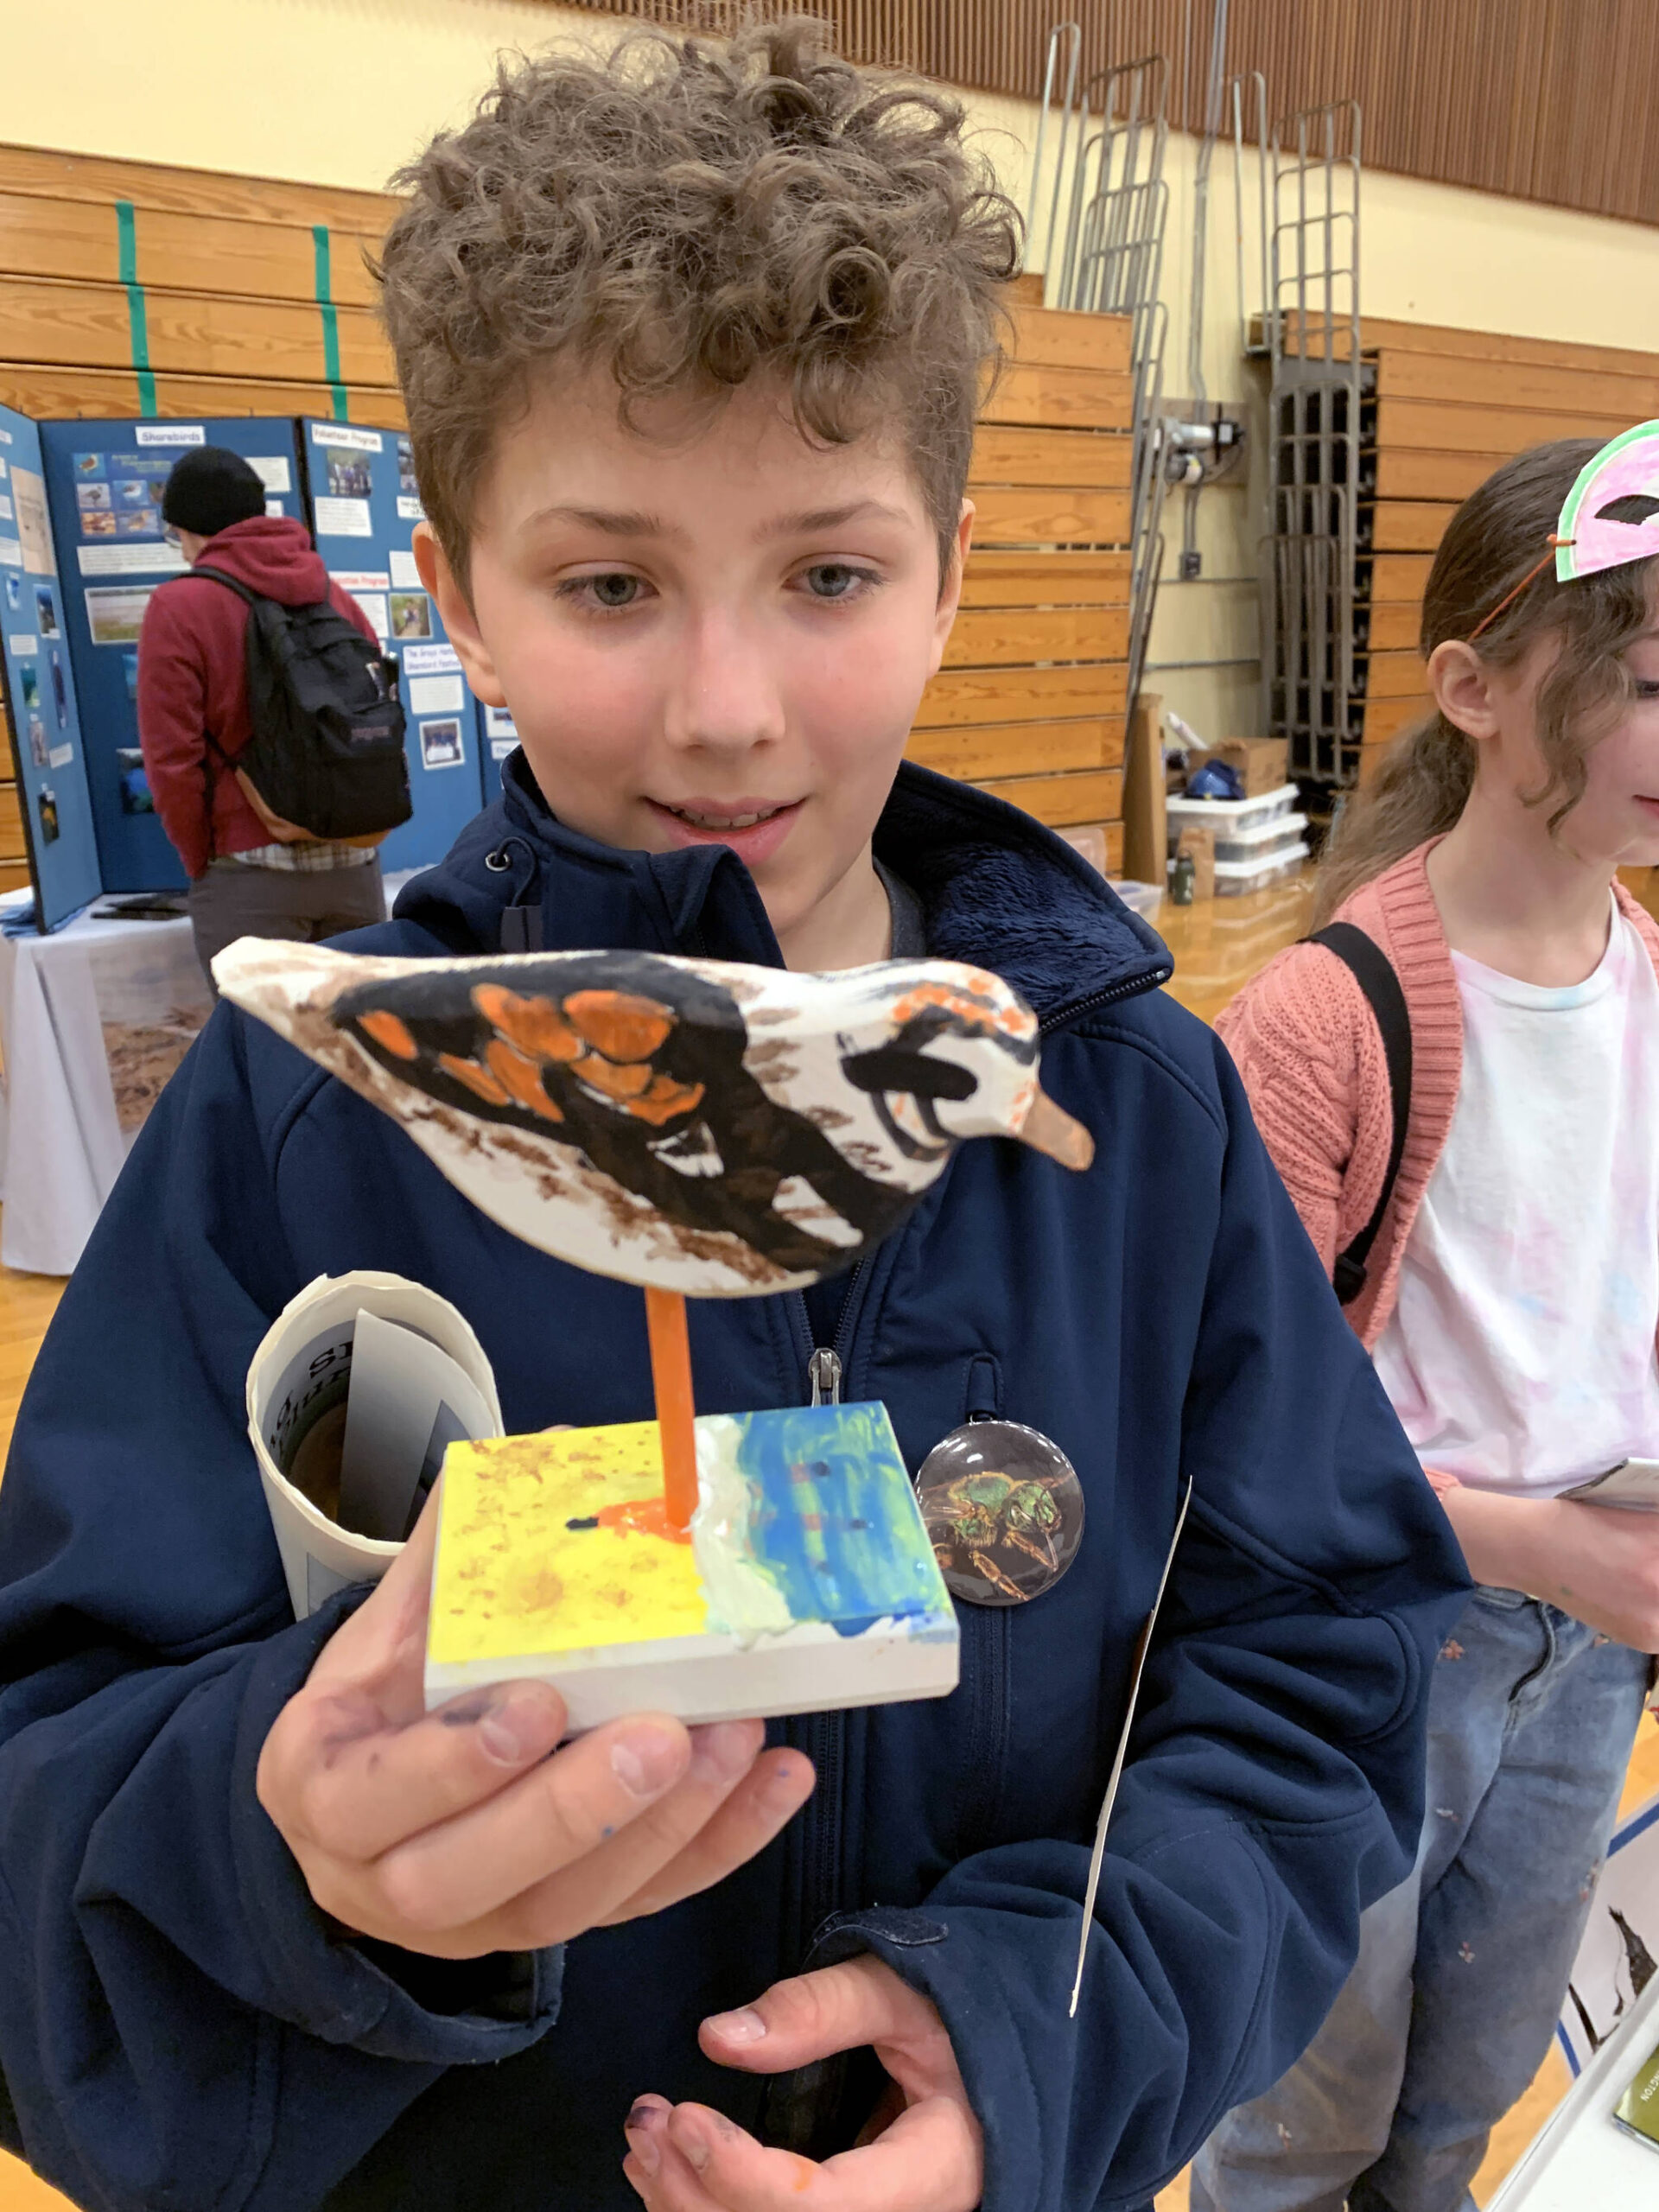 Julia Pinnix / U.S. Fish and Wildlife Service
14-year-old Dryden Quinton holds a model of a ruddy turnstone at the 2024 Grays Harbor Shorebird Festival.